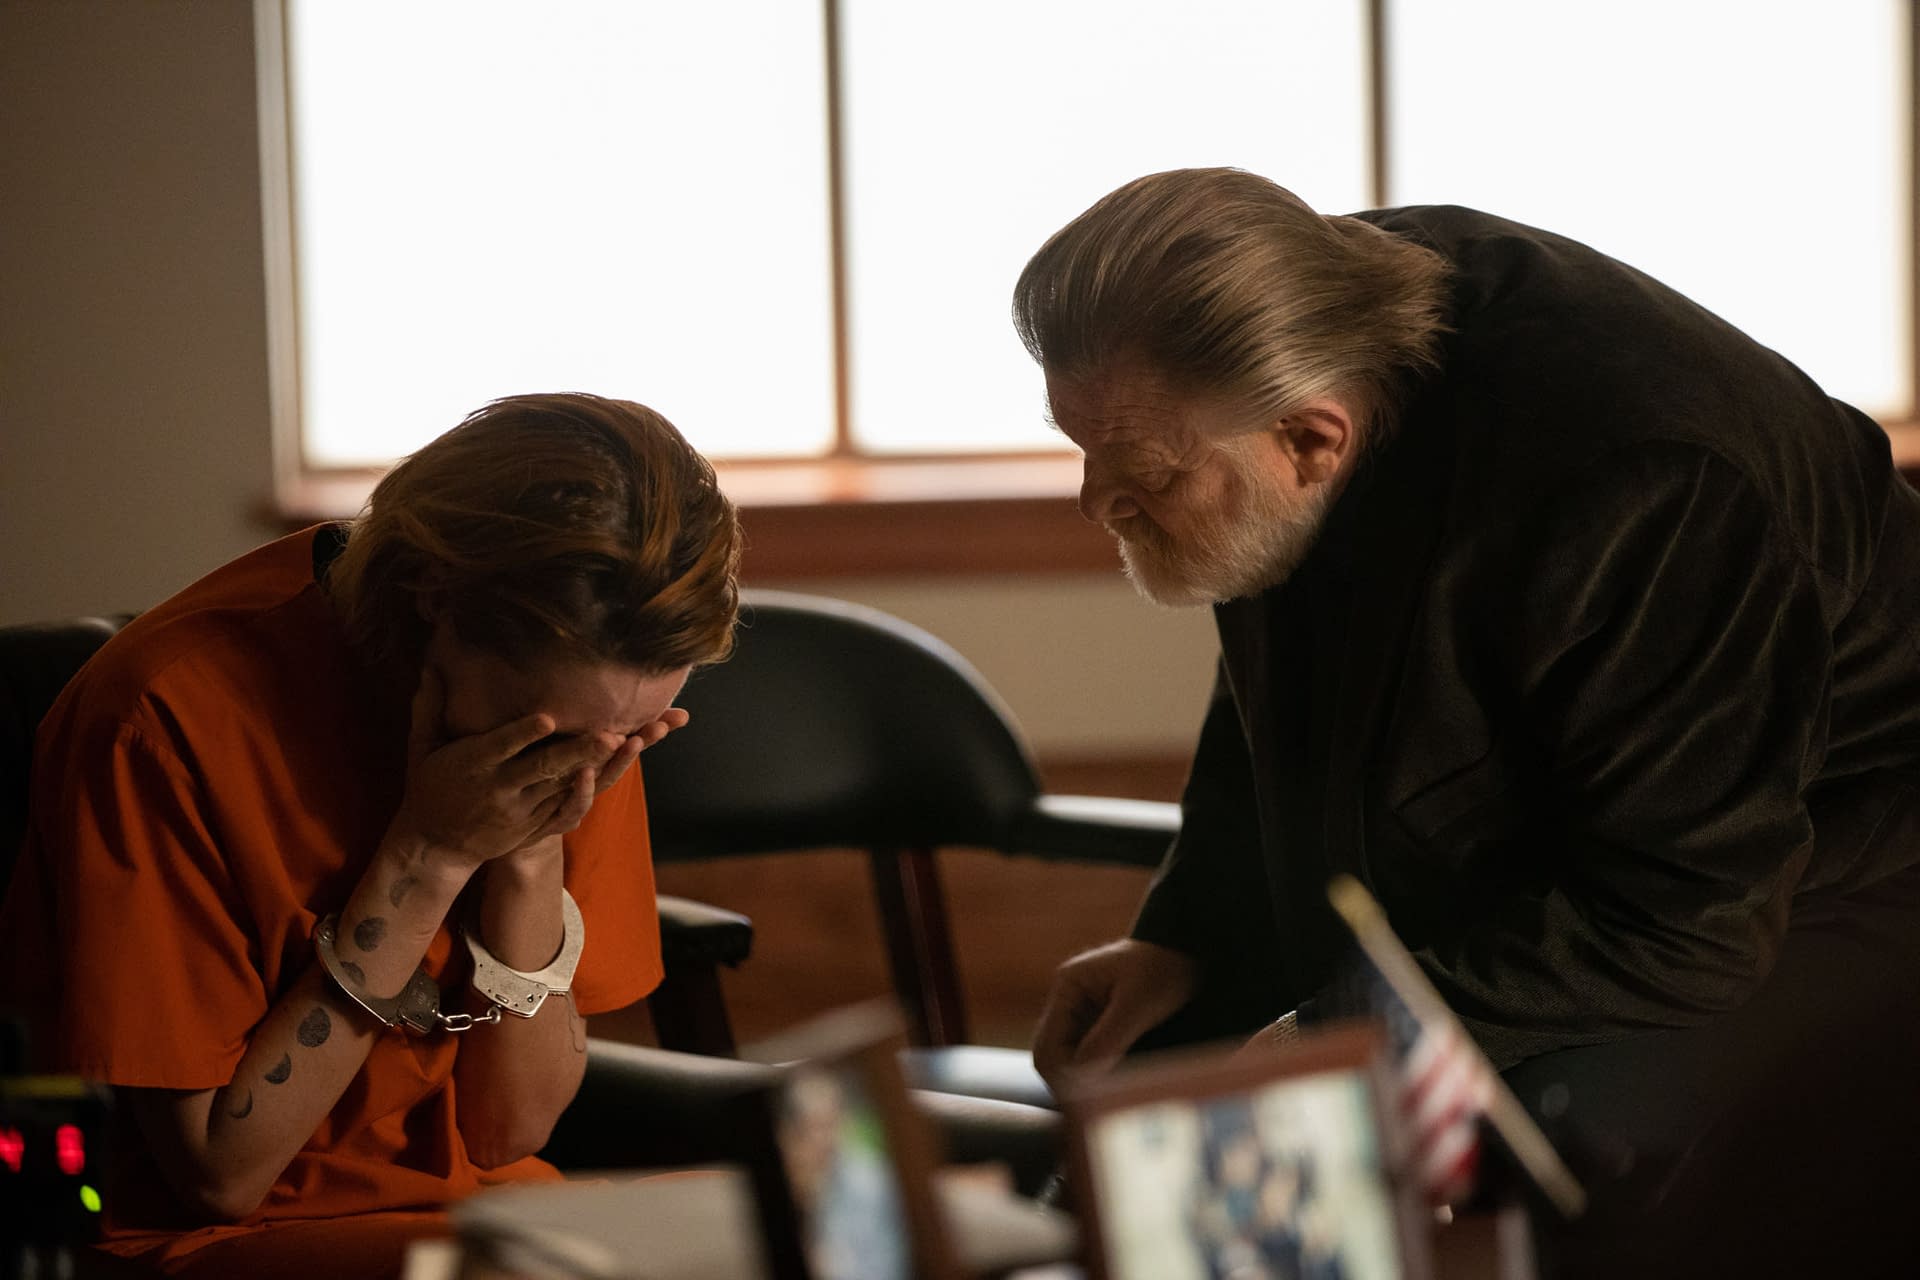 'Mr. Mercedes' Season 3: Audience Shares First-Look Images, Behind the Scenes Teaser [VIDEO]